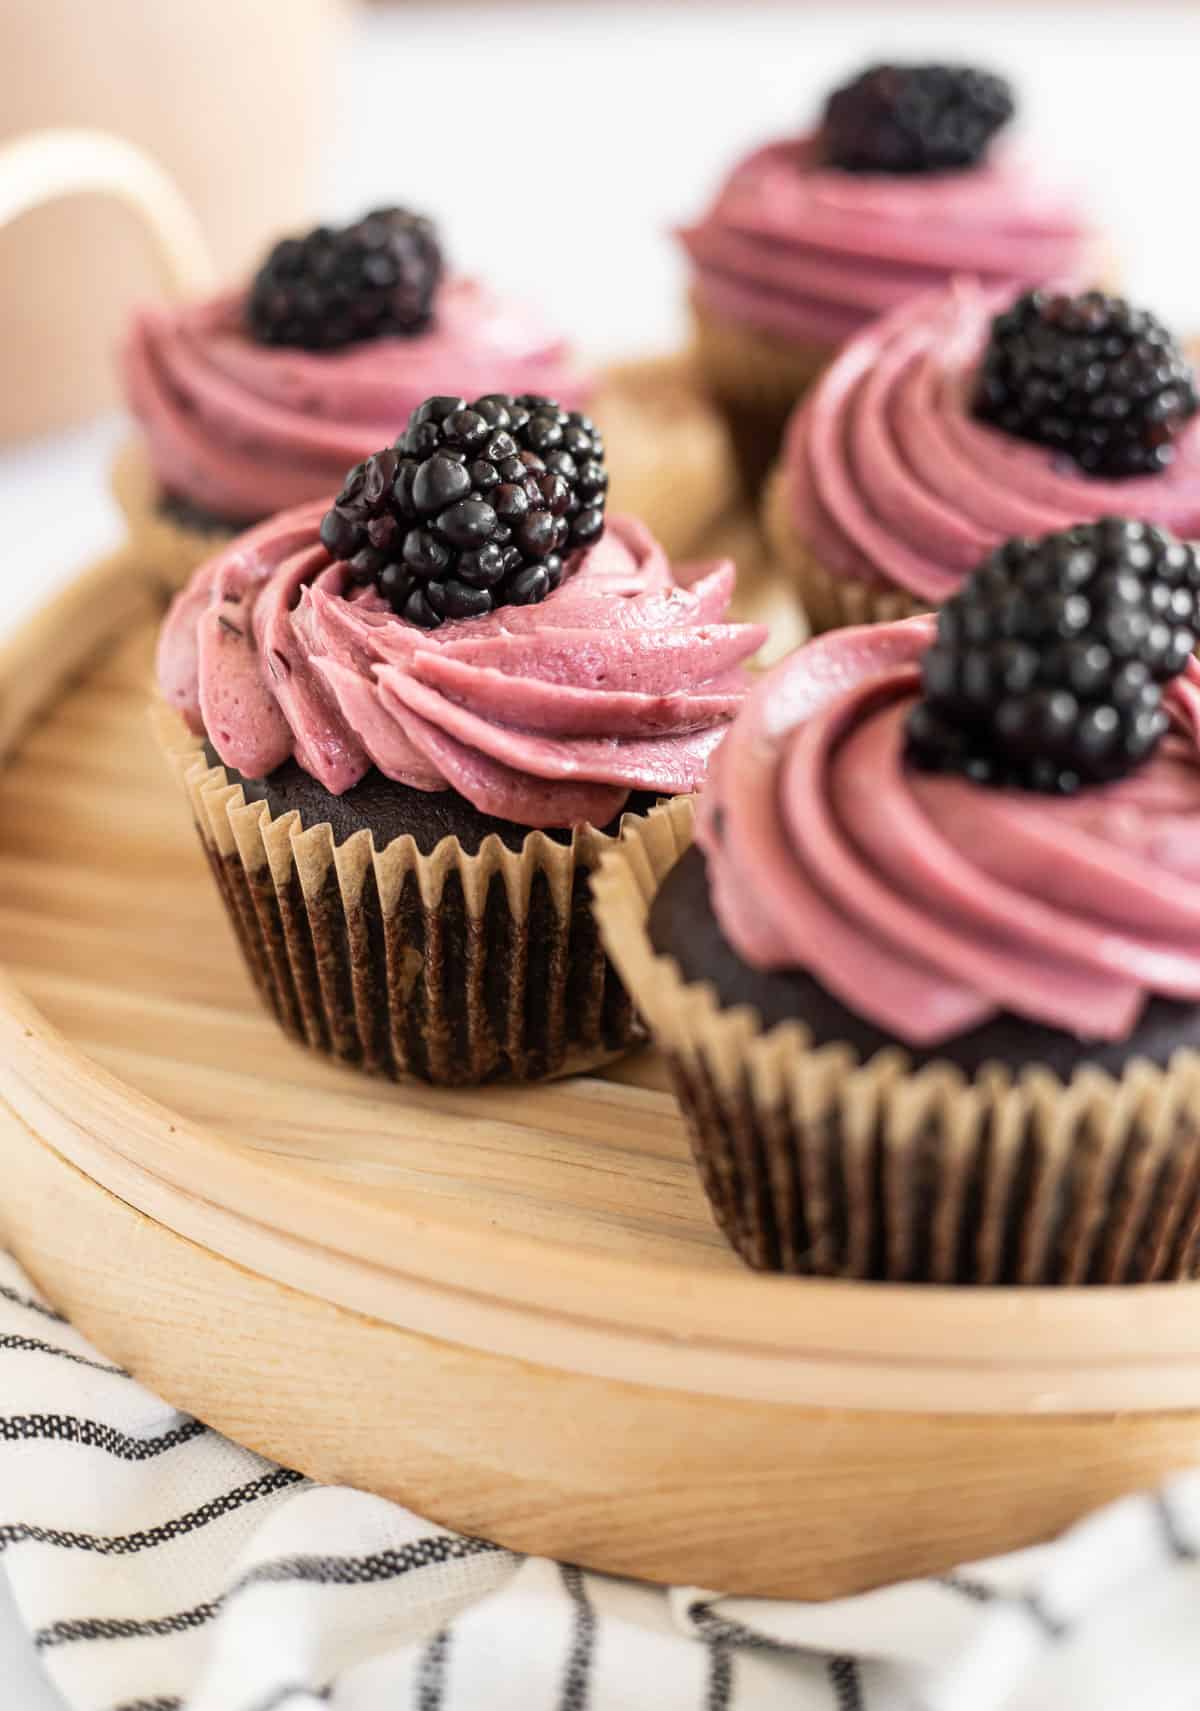 chocolate blackberry cupcakes on a wooden platter topped with fresh blackberries.